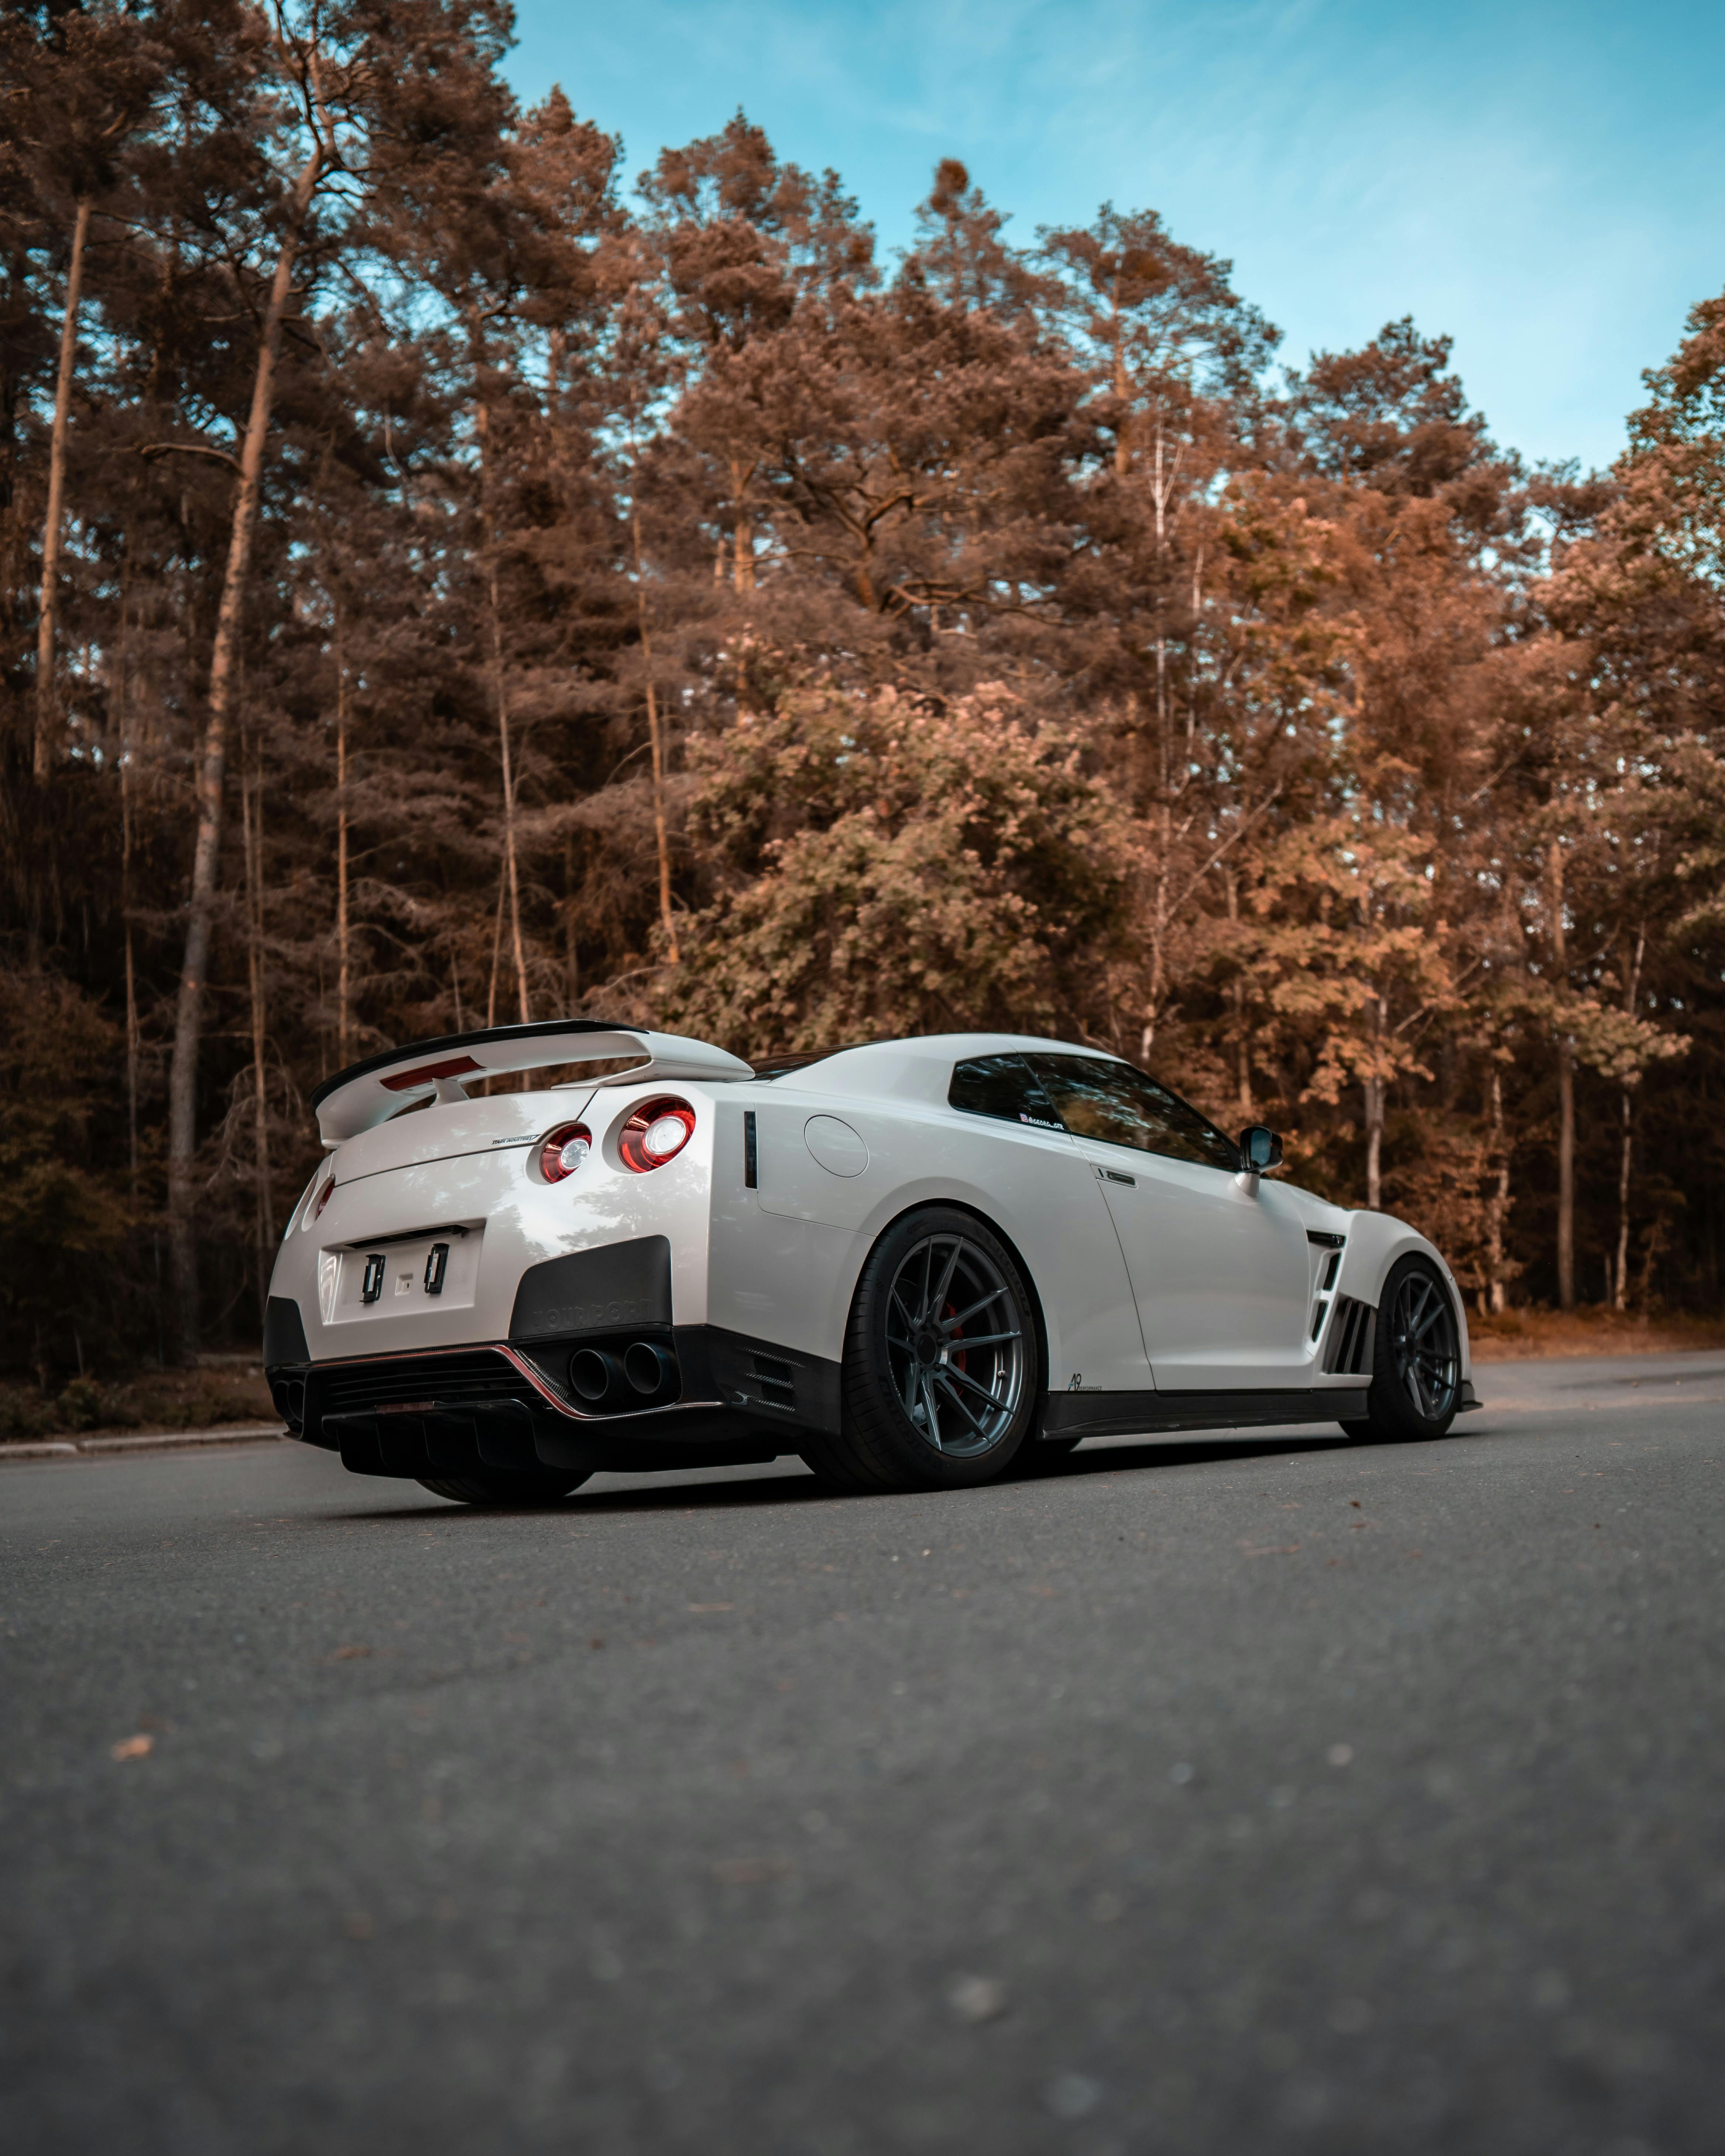 Cars Wallpapers  Page 9 of 28  iPhone Wallpapers  iPhone Wallpapers  Nissan  gtr black Nissan gtr wallpapers Nissan gtr